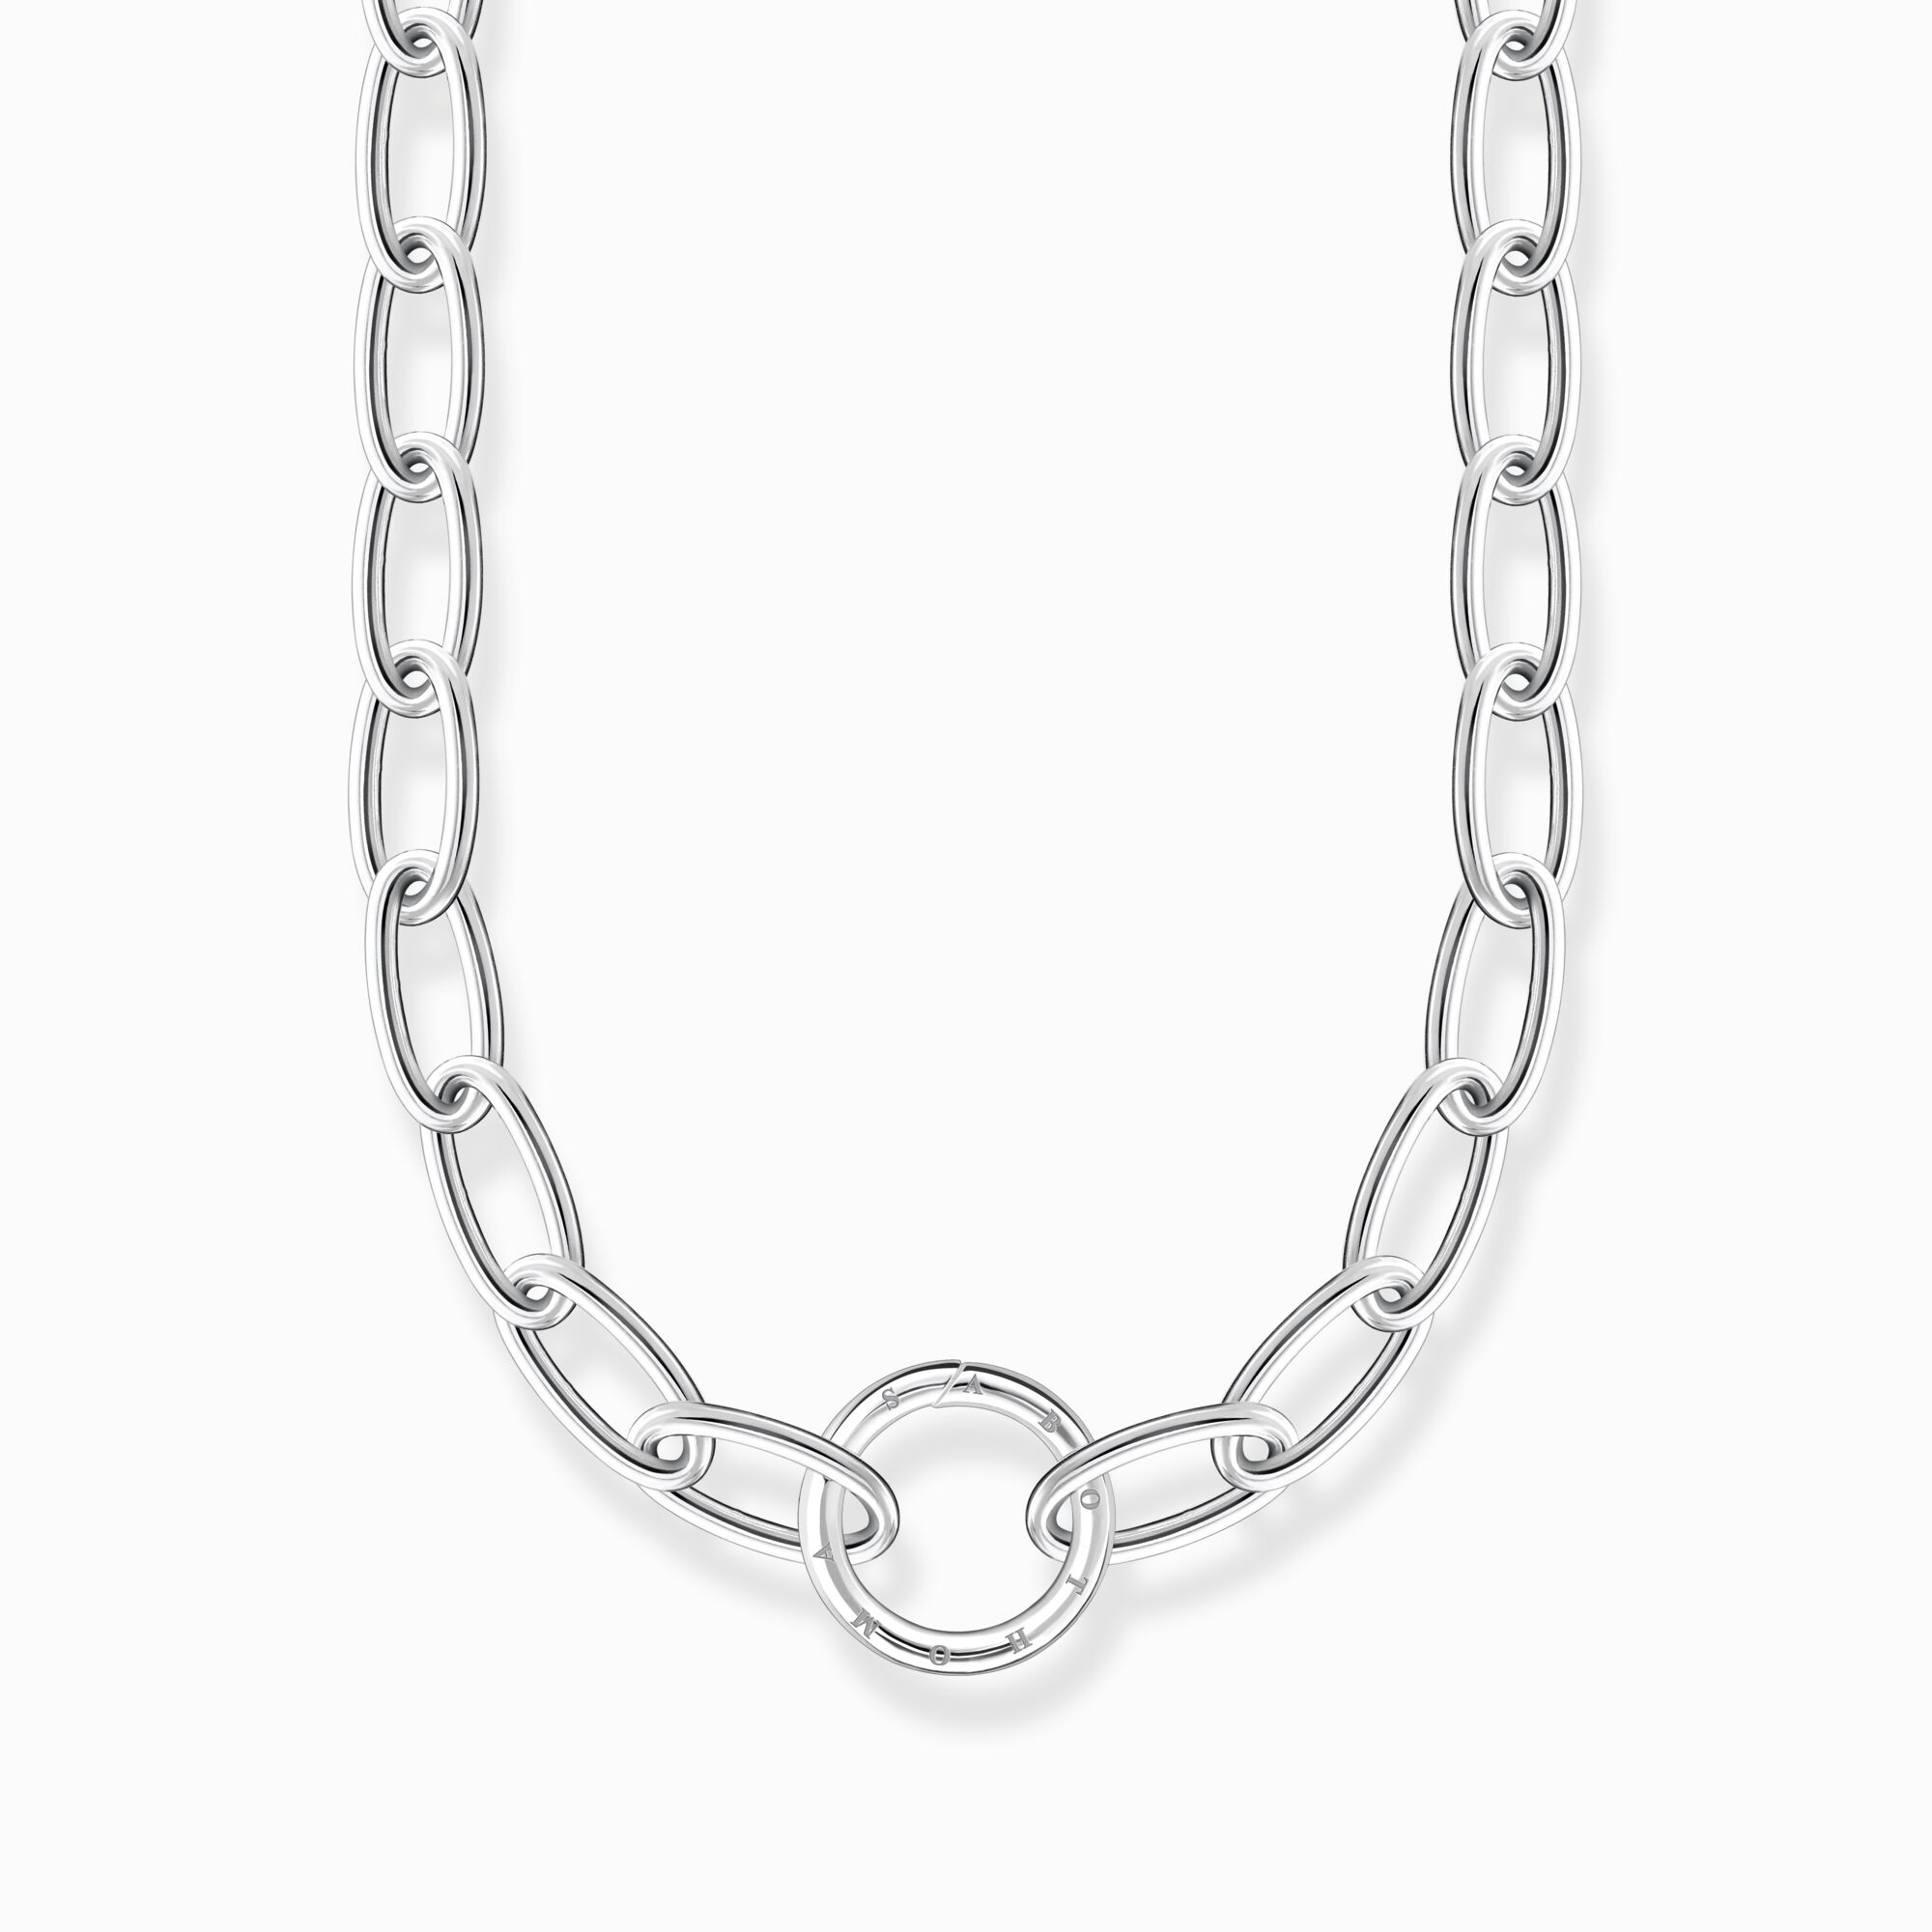 THOMAS SABO for Chain women clasp ring – with necklace